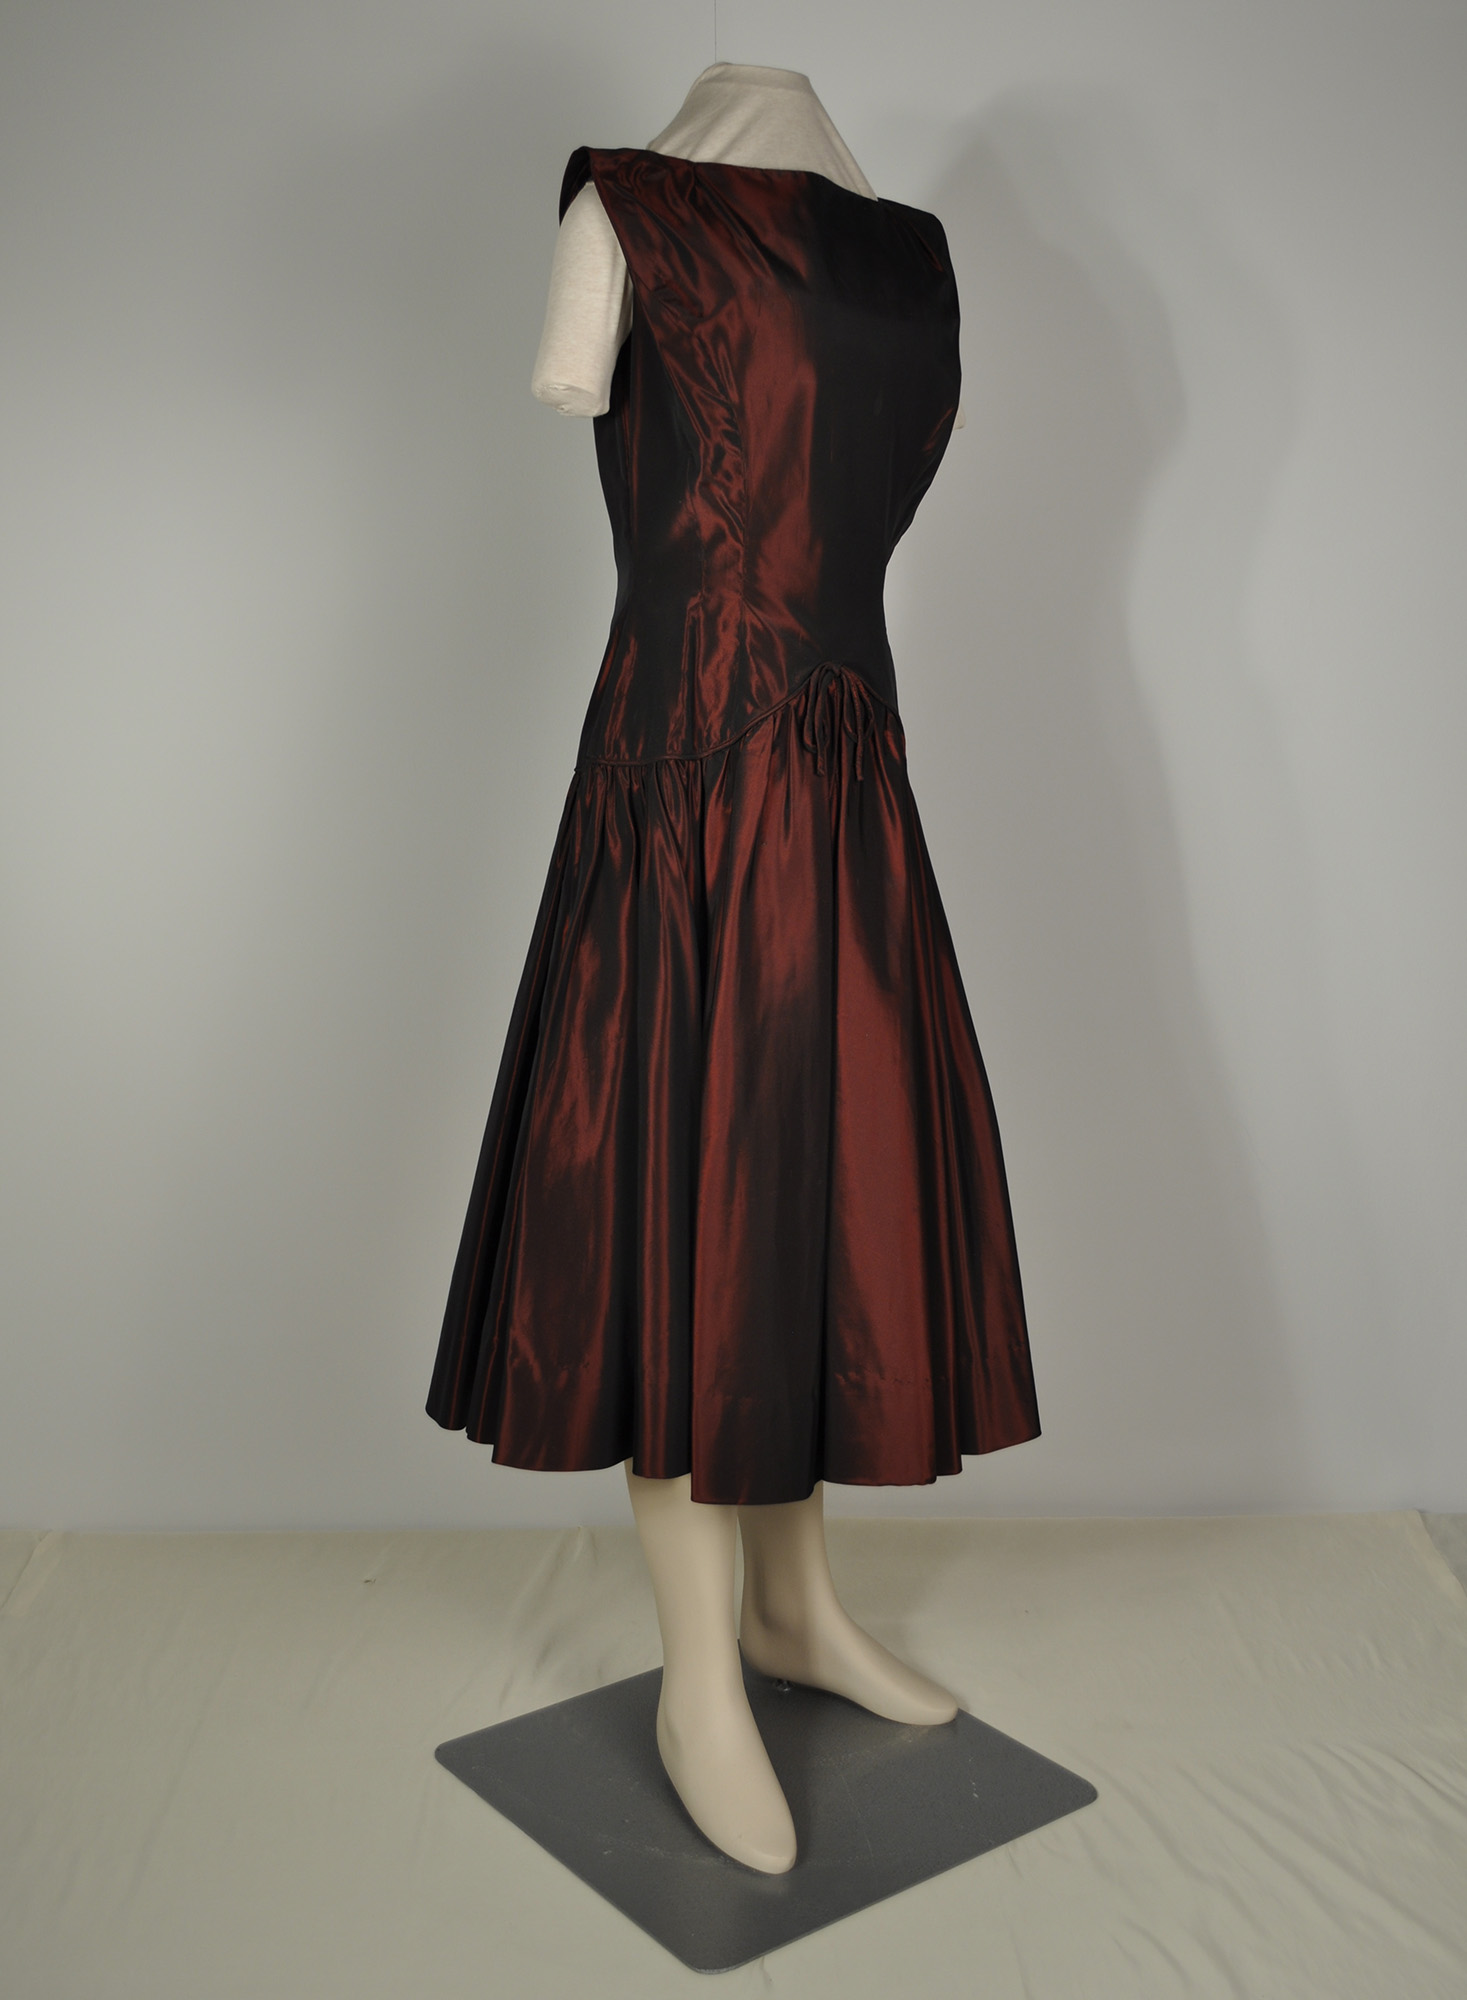 A woman's cocktail dress in the fit and flare style, made from burgundy taffeta. It has a high neckline and short sleeves